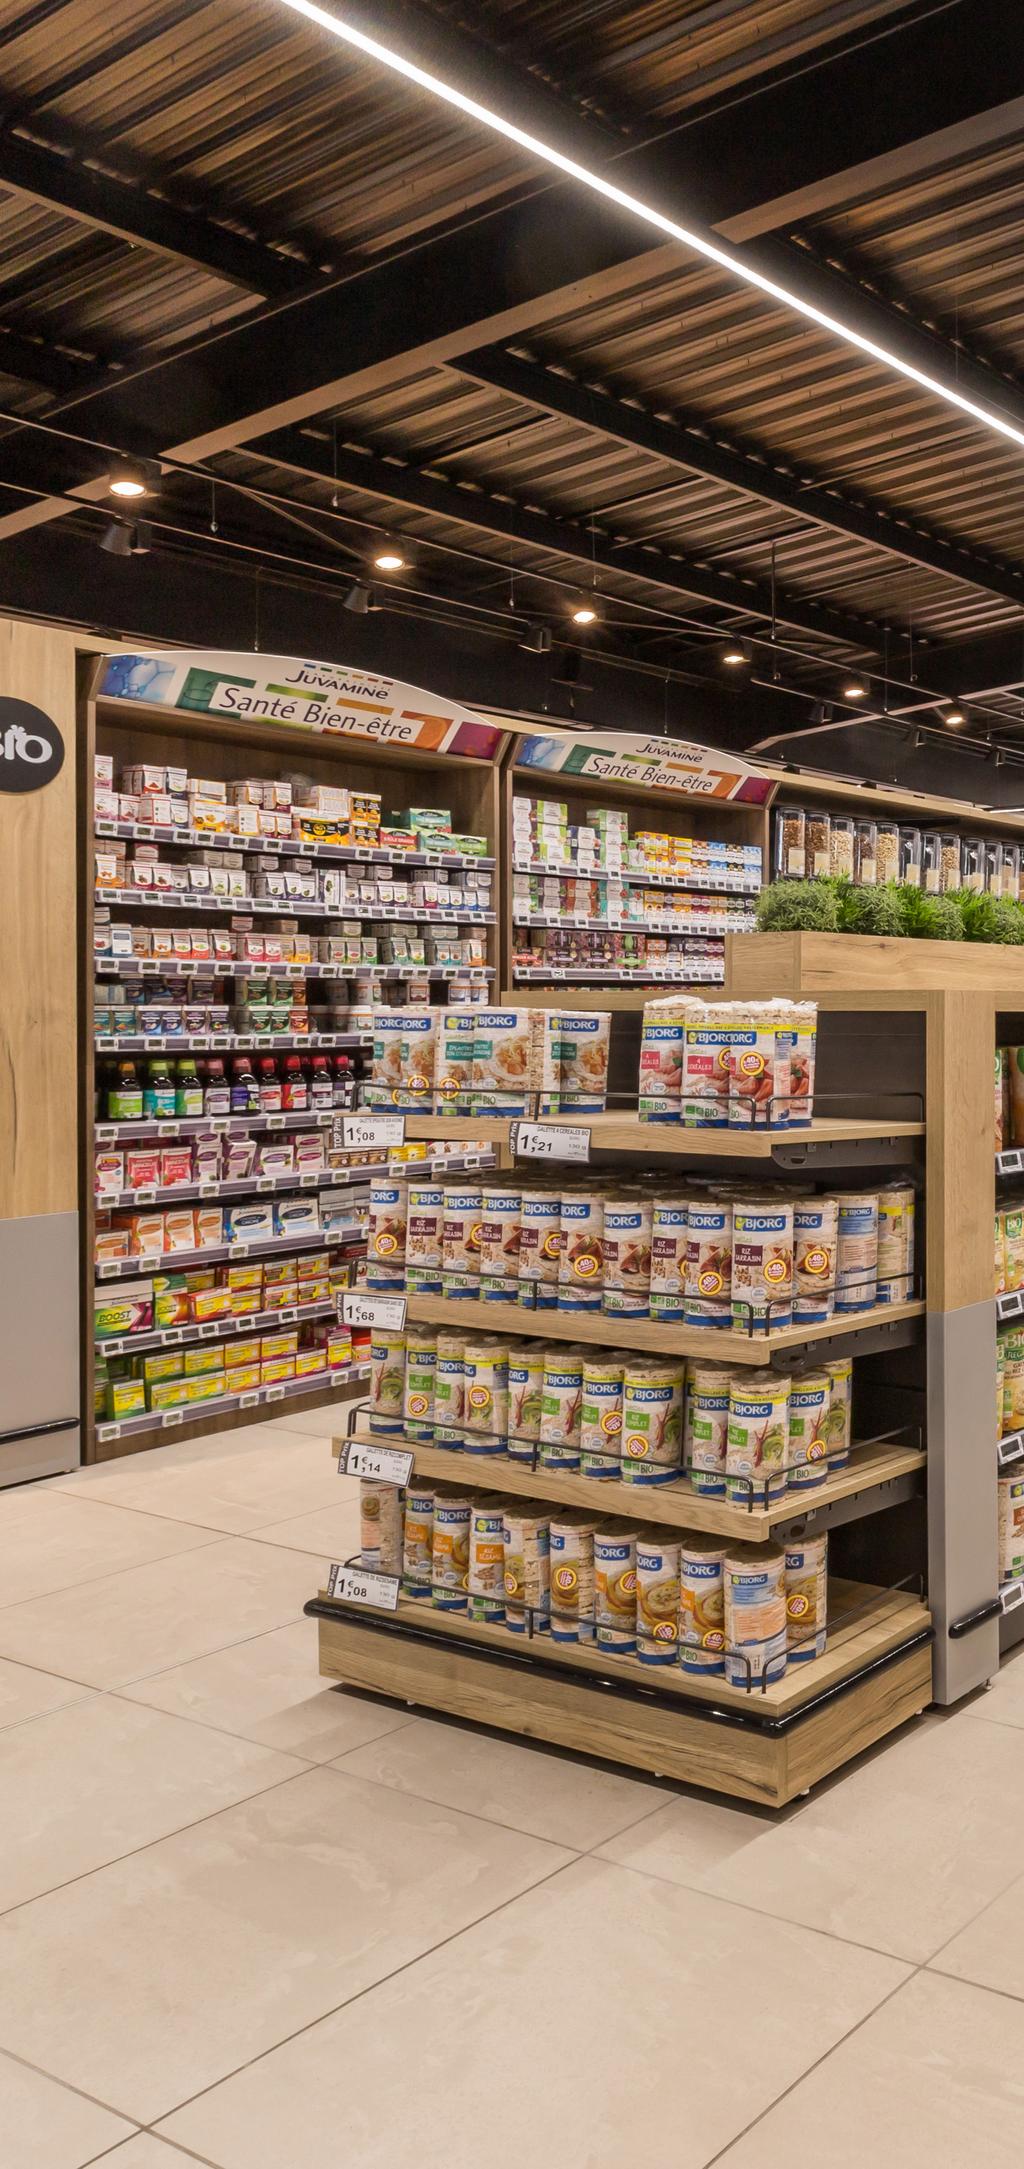 ORGANIC PRODUCTS, A DEDICATED SPACE The shelving units have wood and plant-based finishes to stress the natural and give the standard steel fittings an